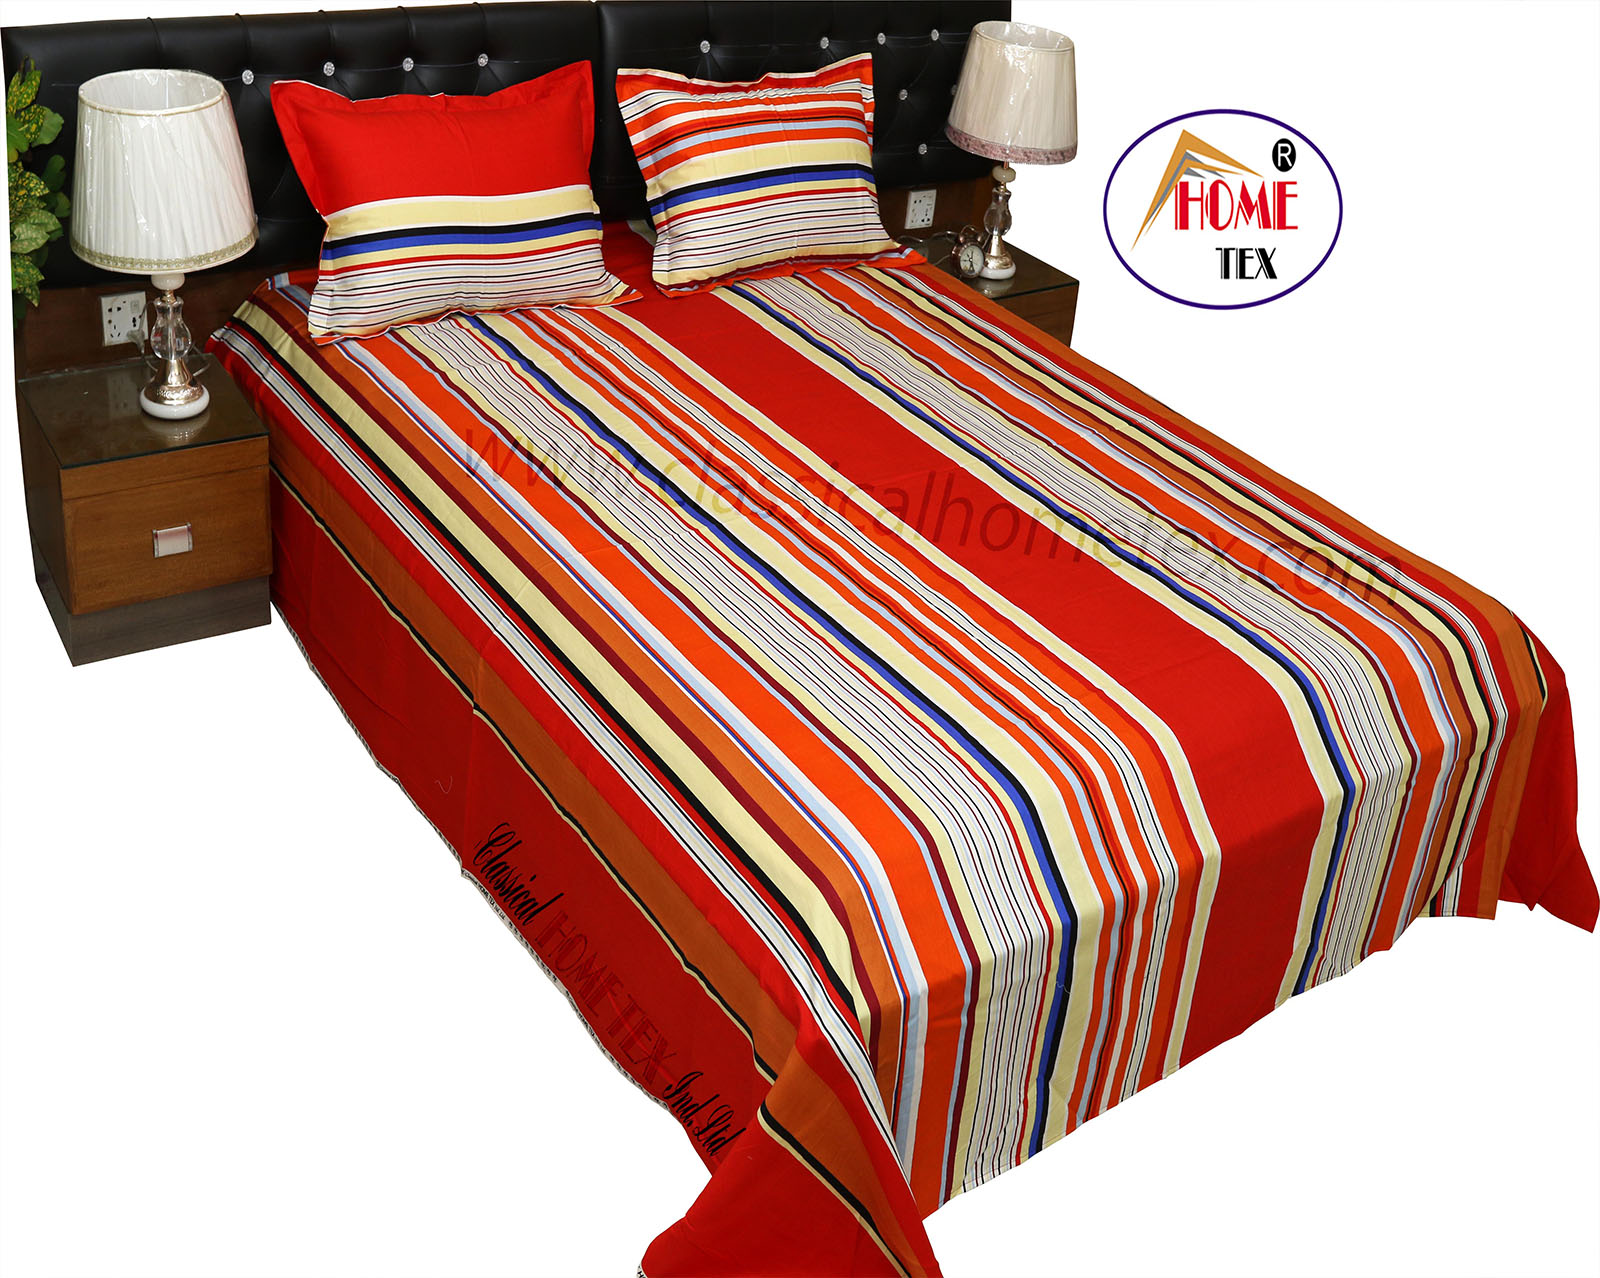 double bed mattresses price